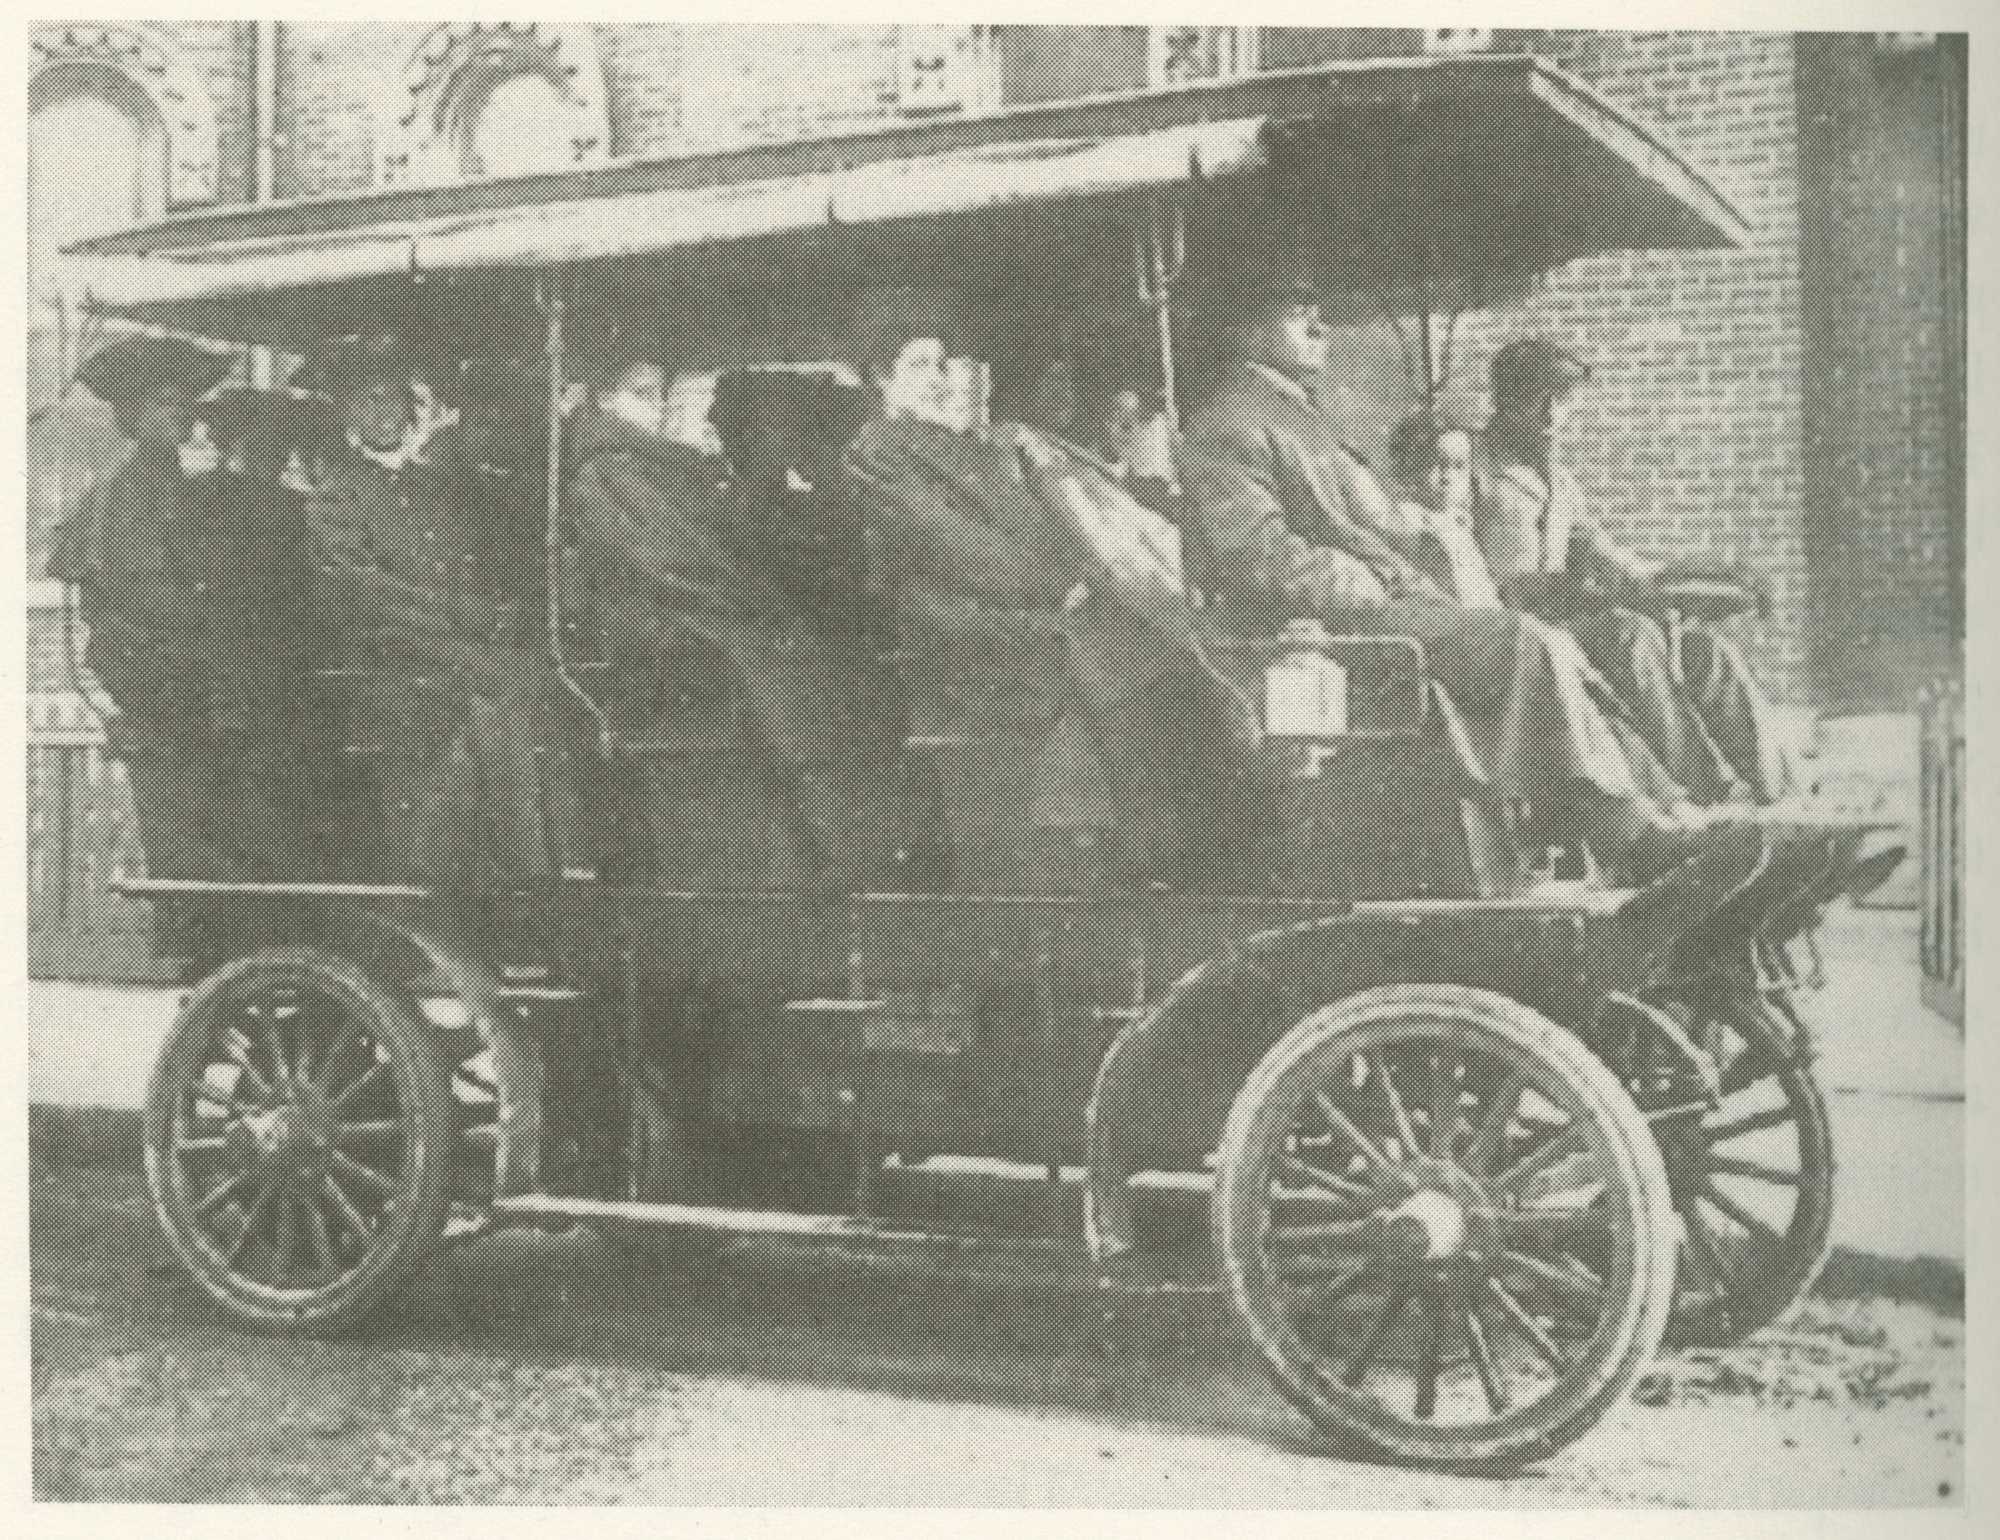 Photograph of Bus Operated by Union Transportation Company